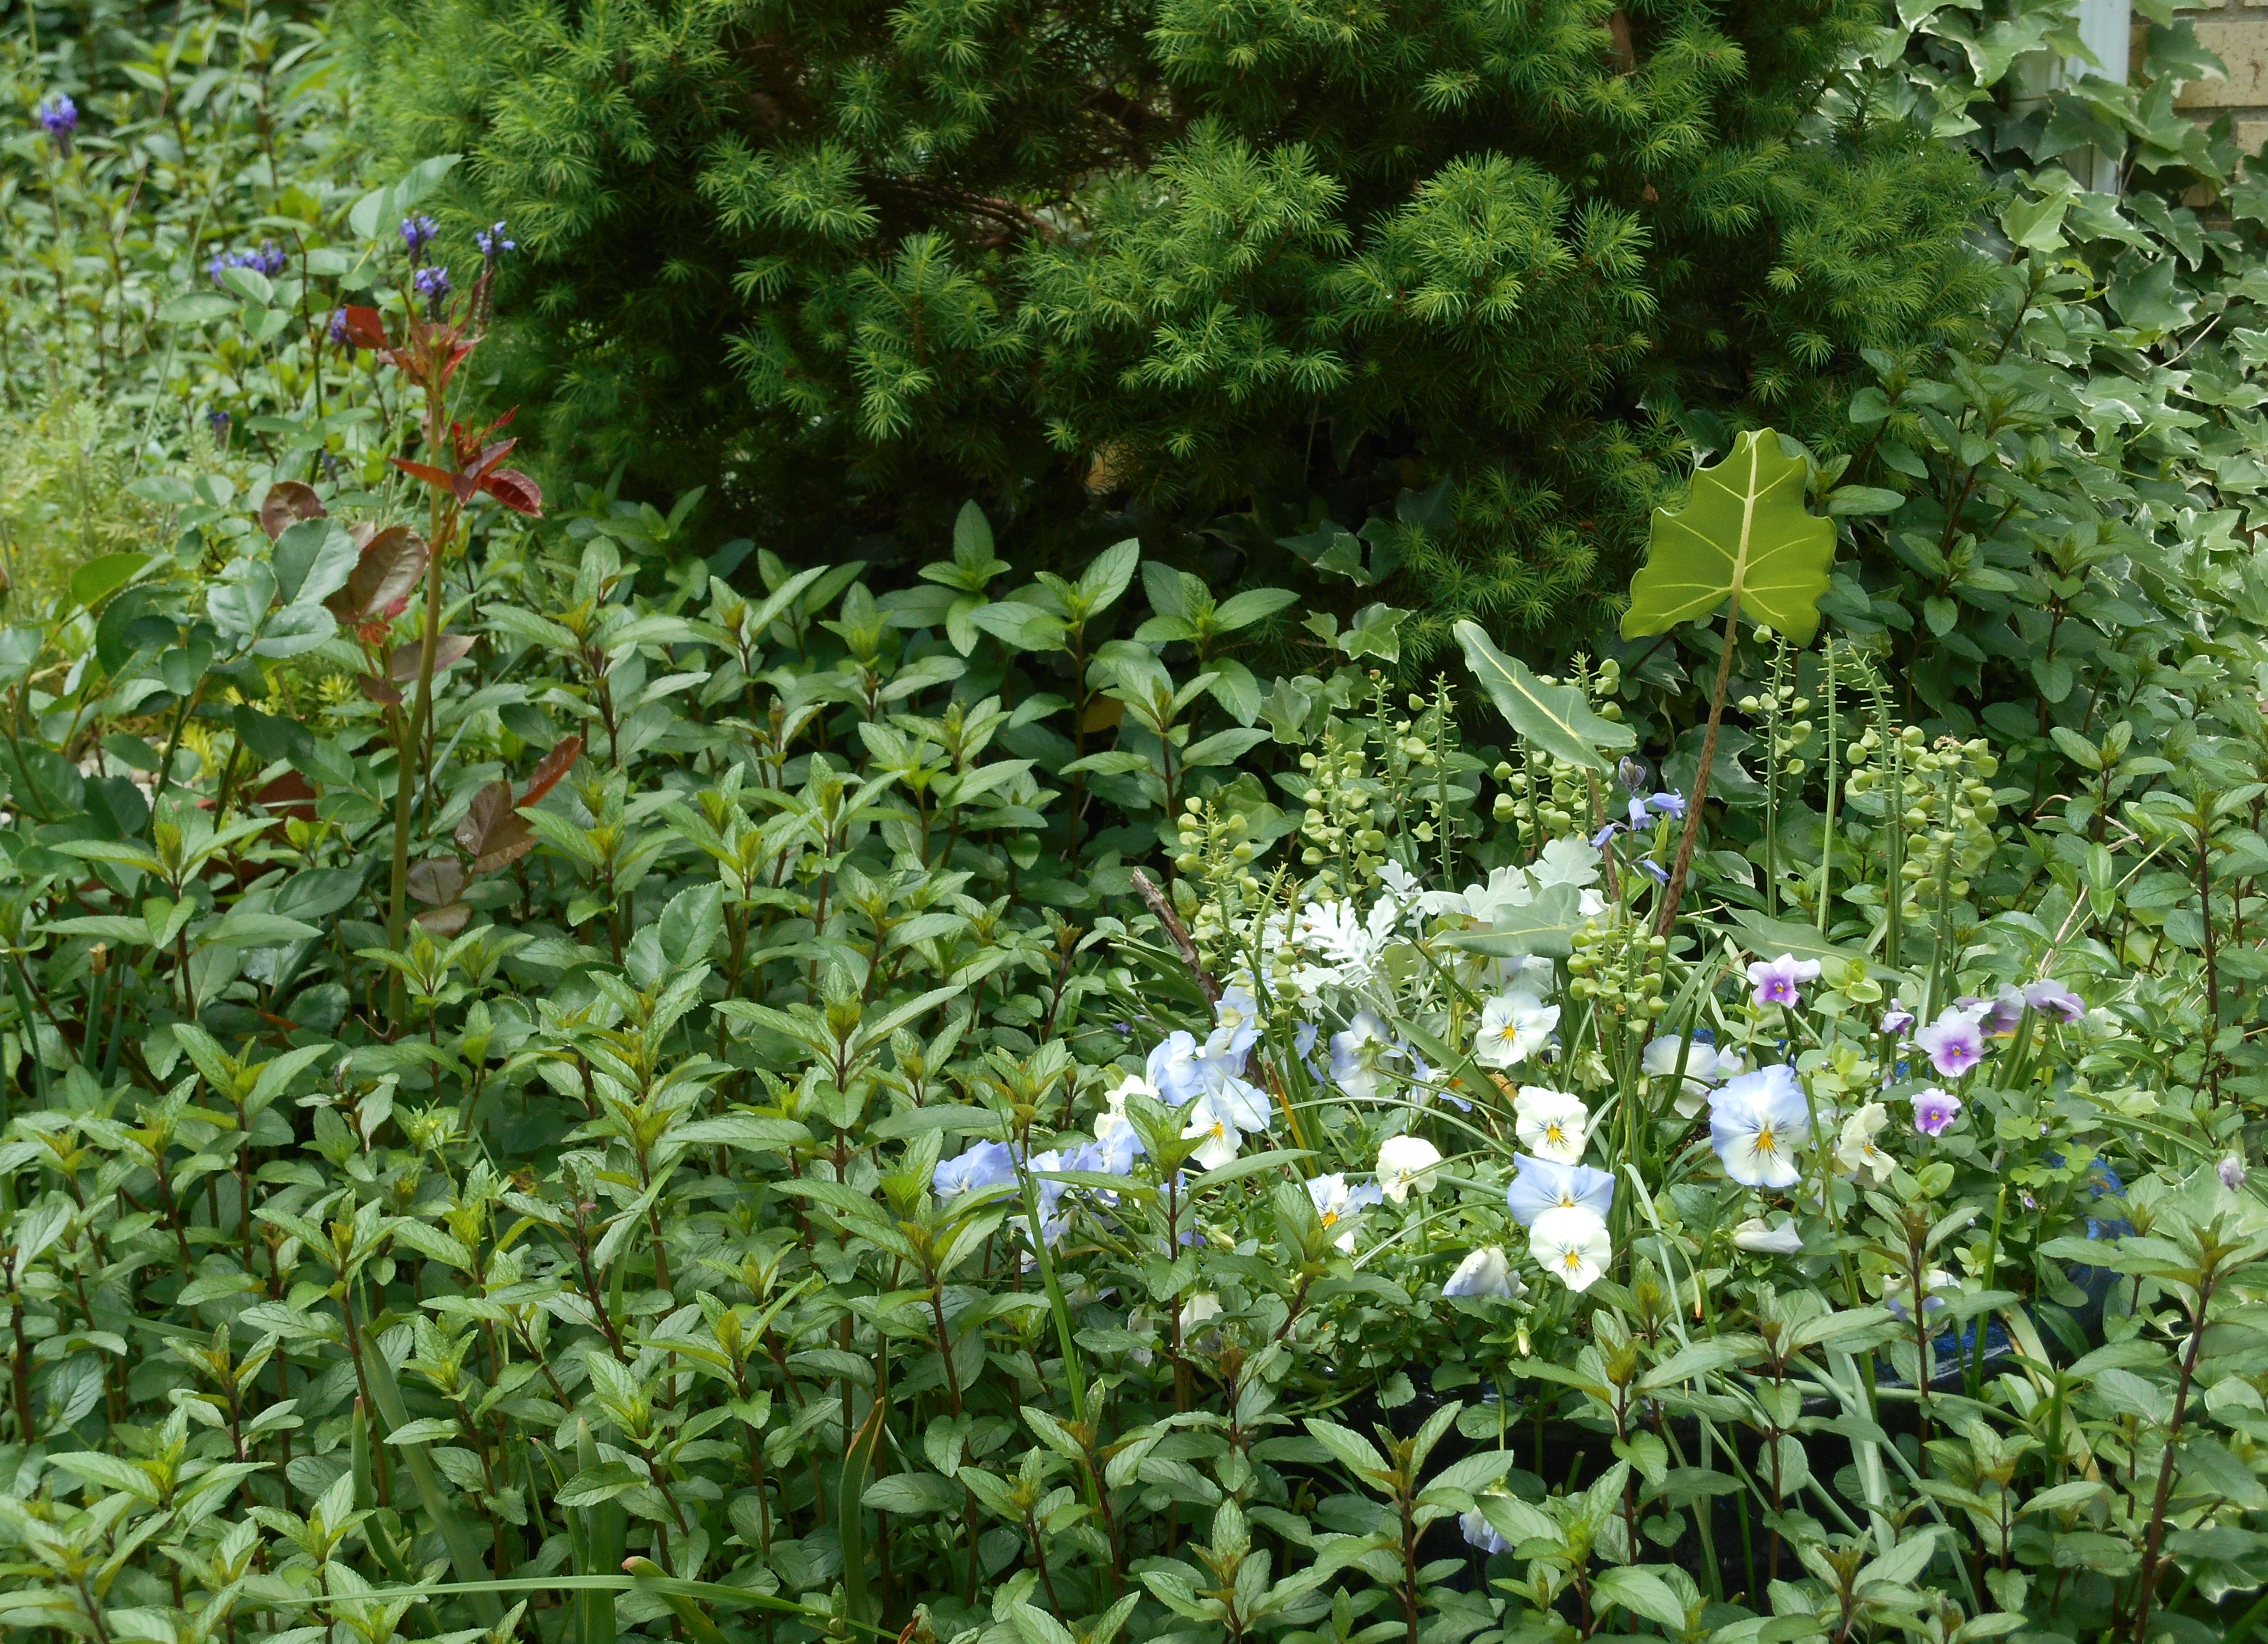 The wider view shows Violas also untouched this spring.